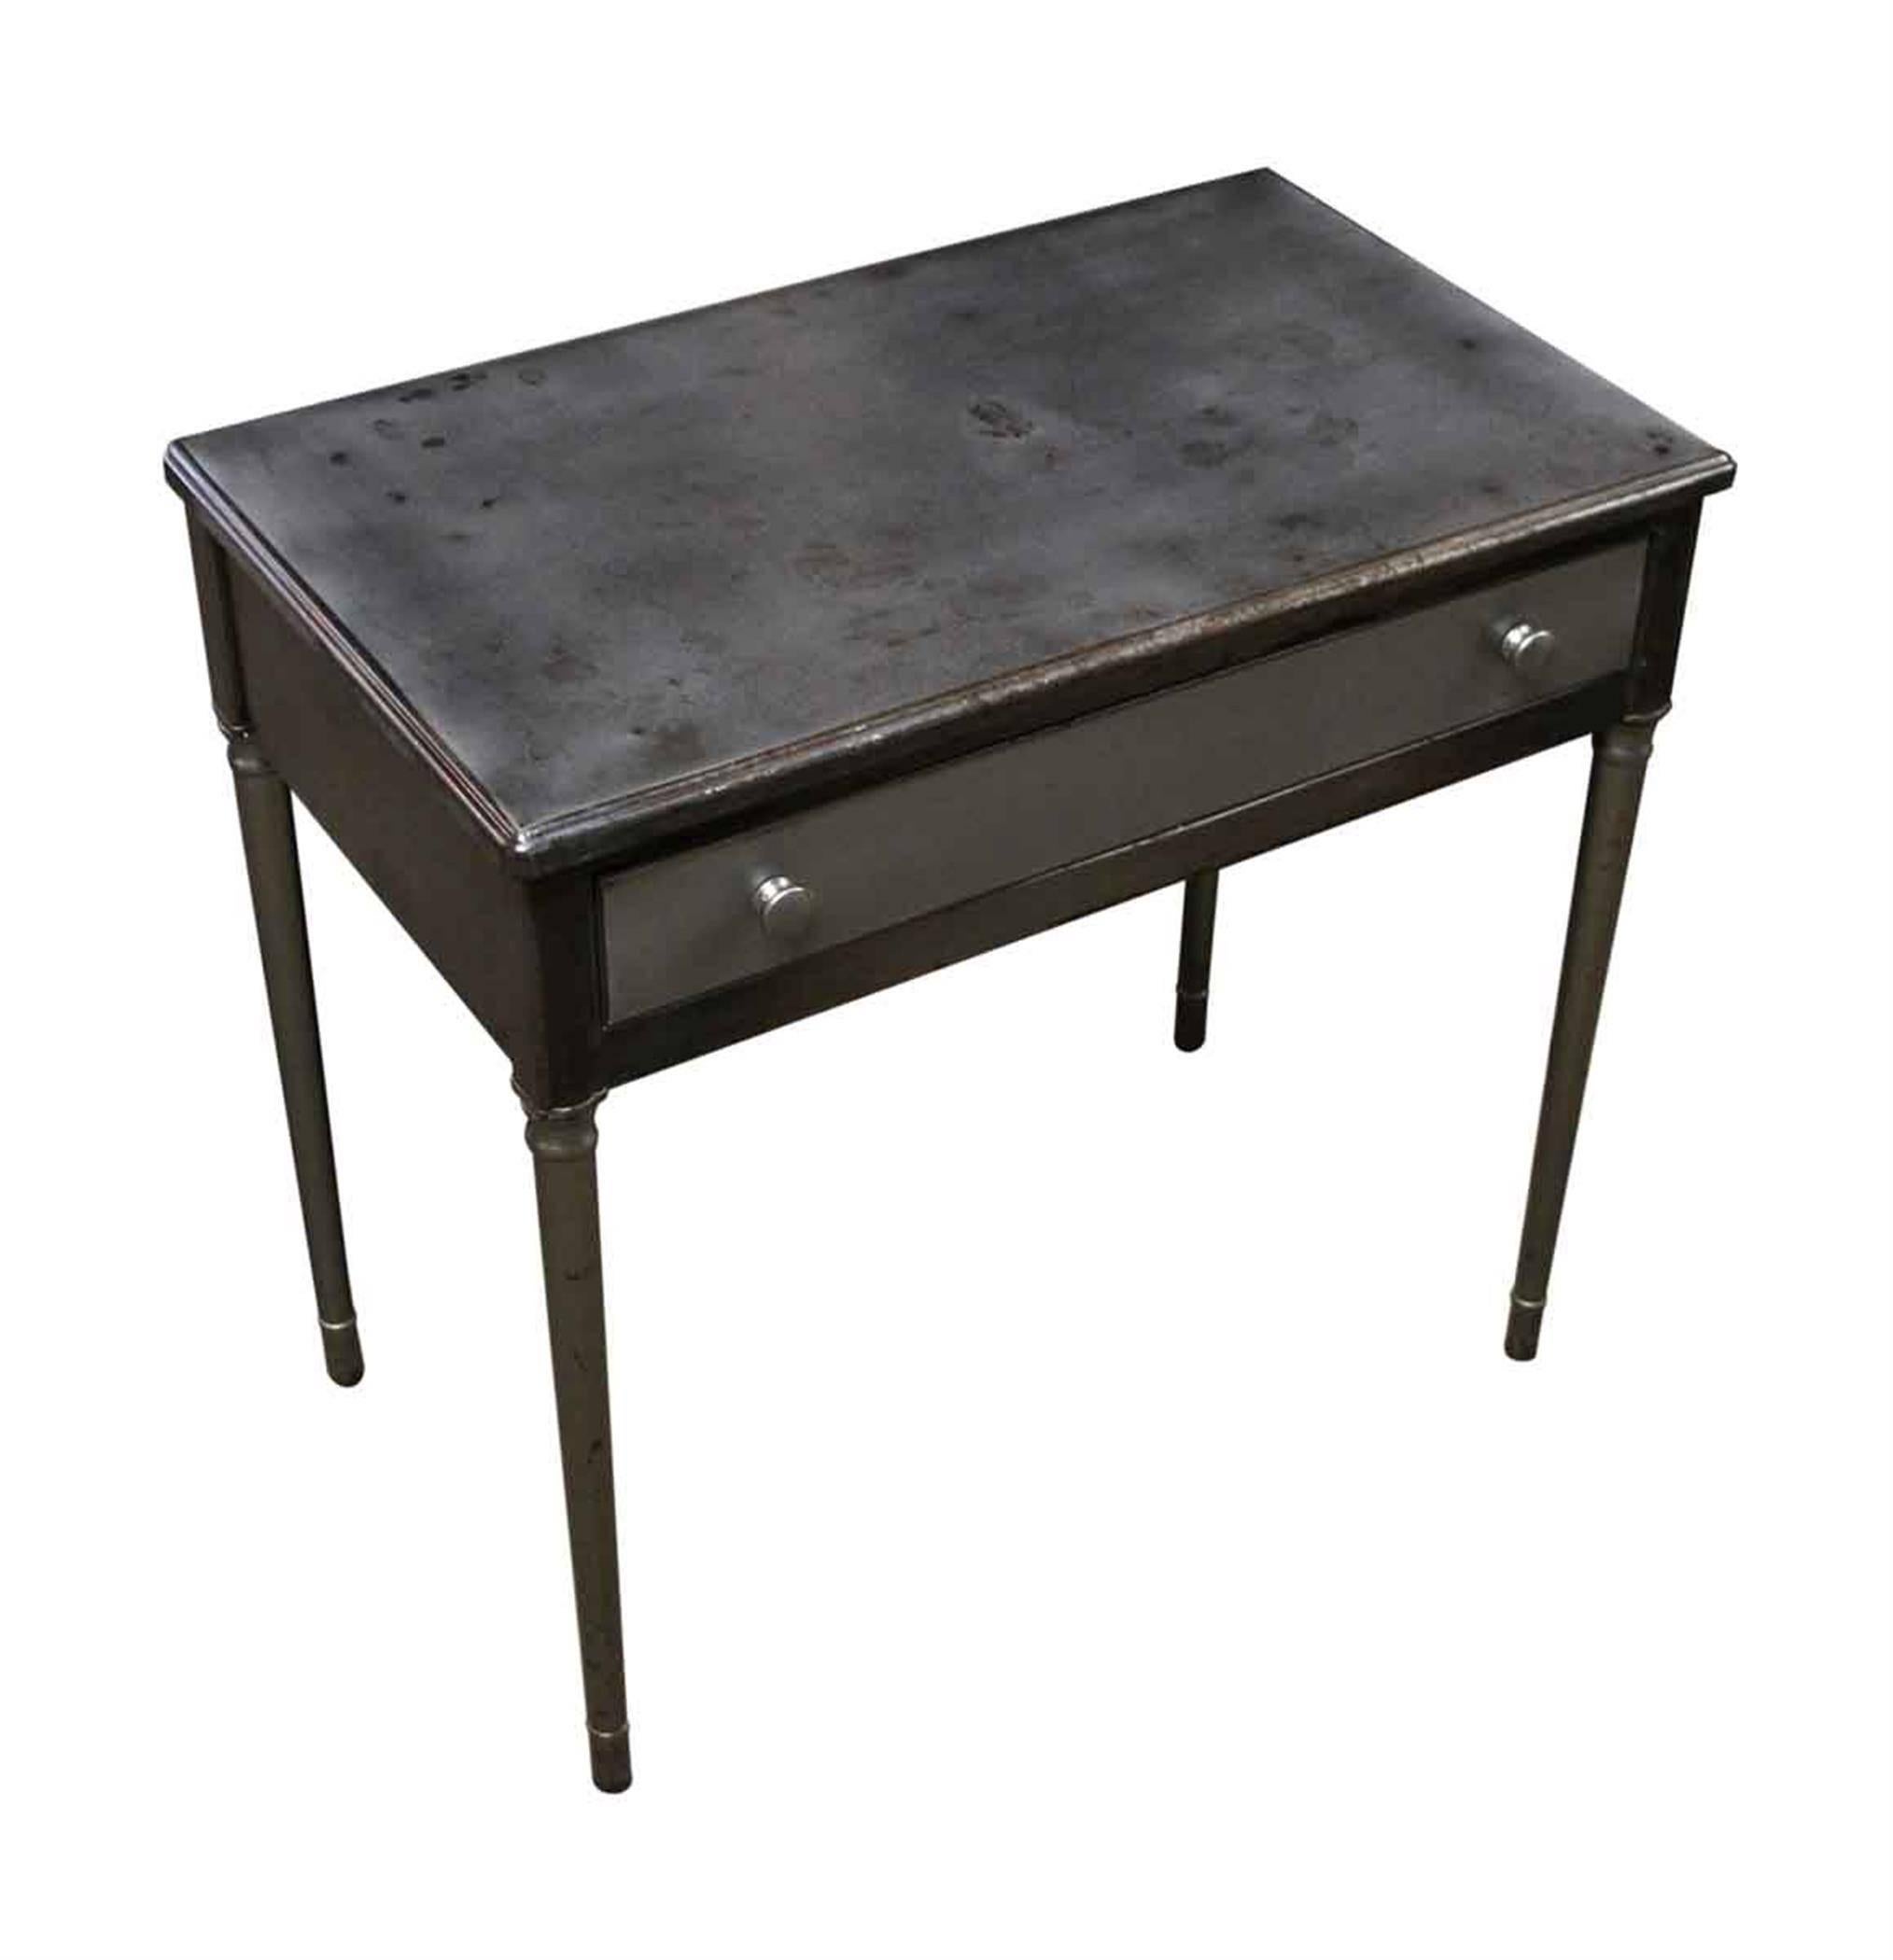 Mid-20th Century 1930s Refinished Steel Industrial Desk with One Drawer